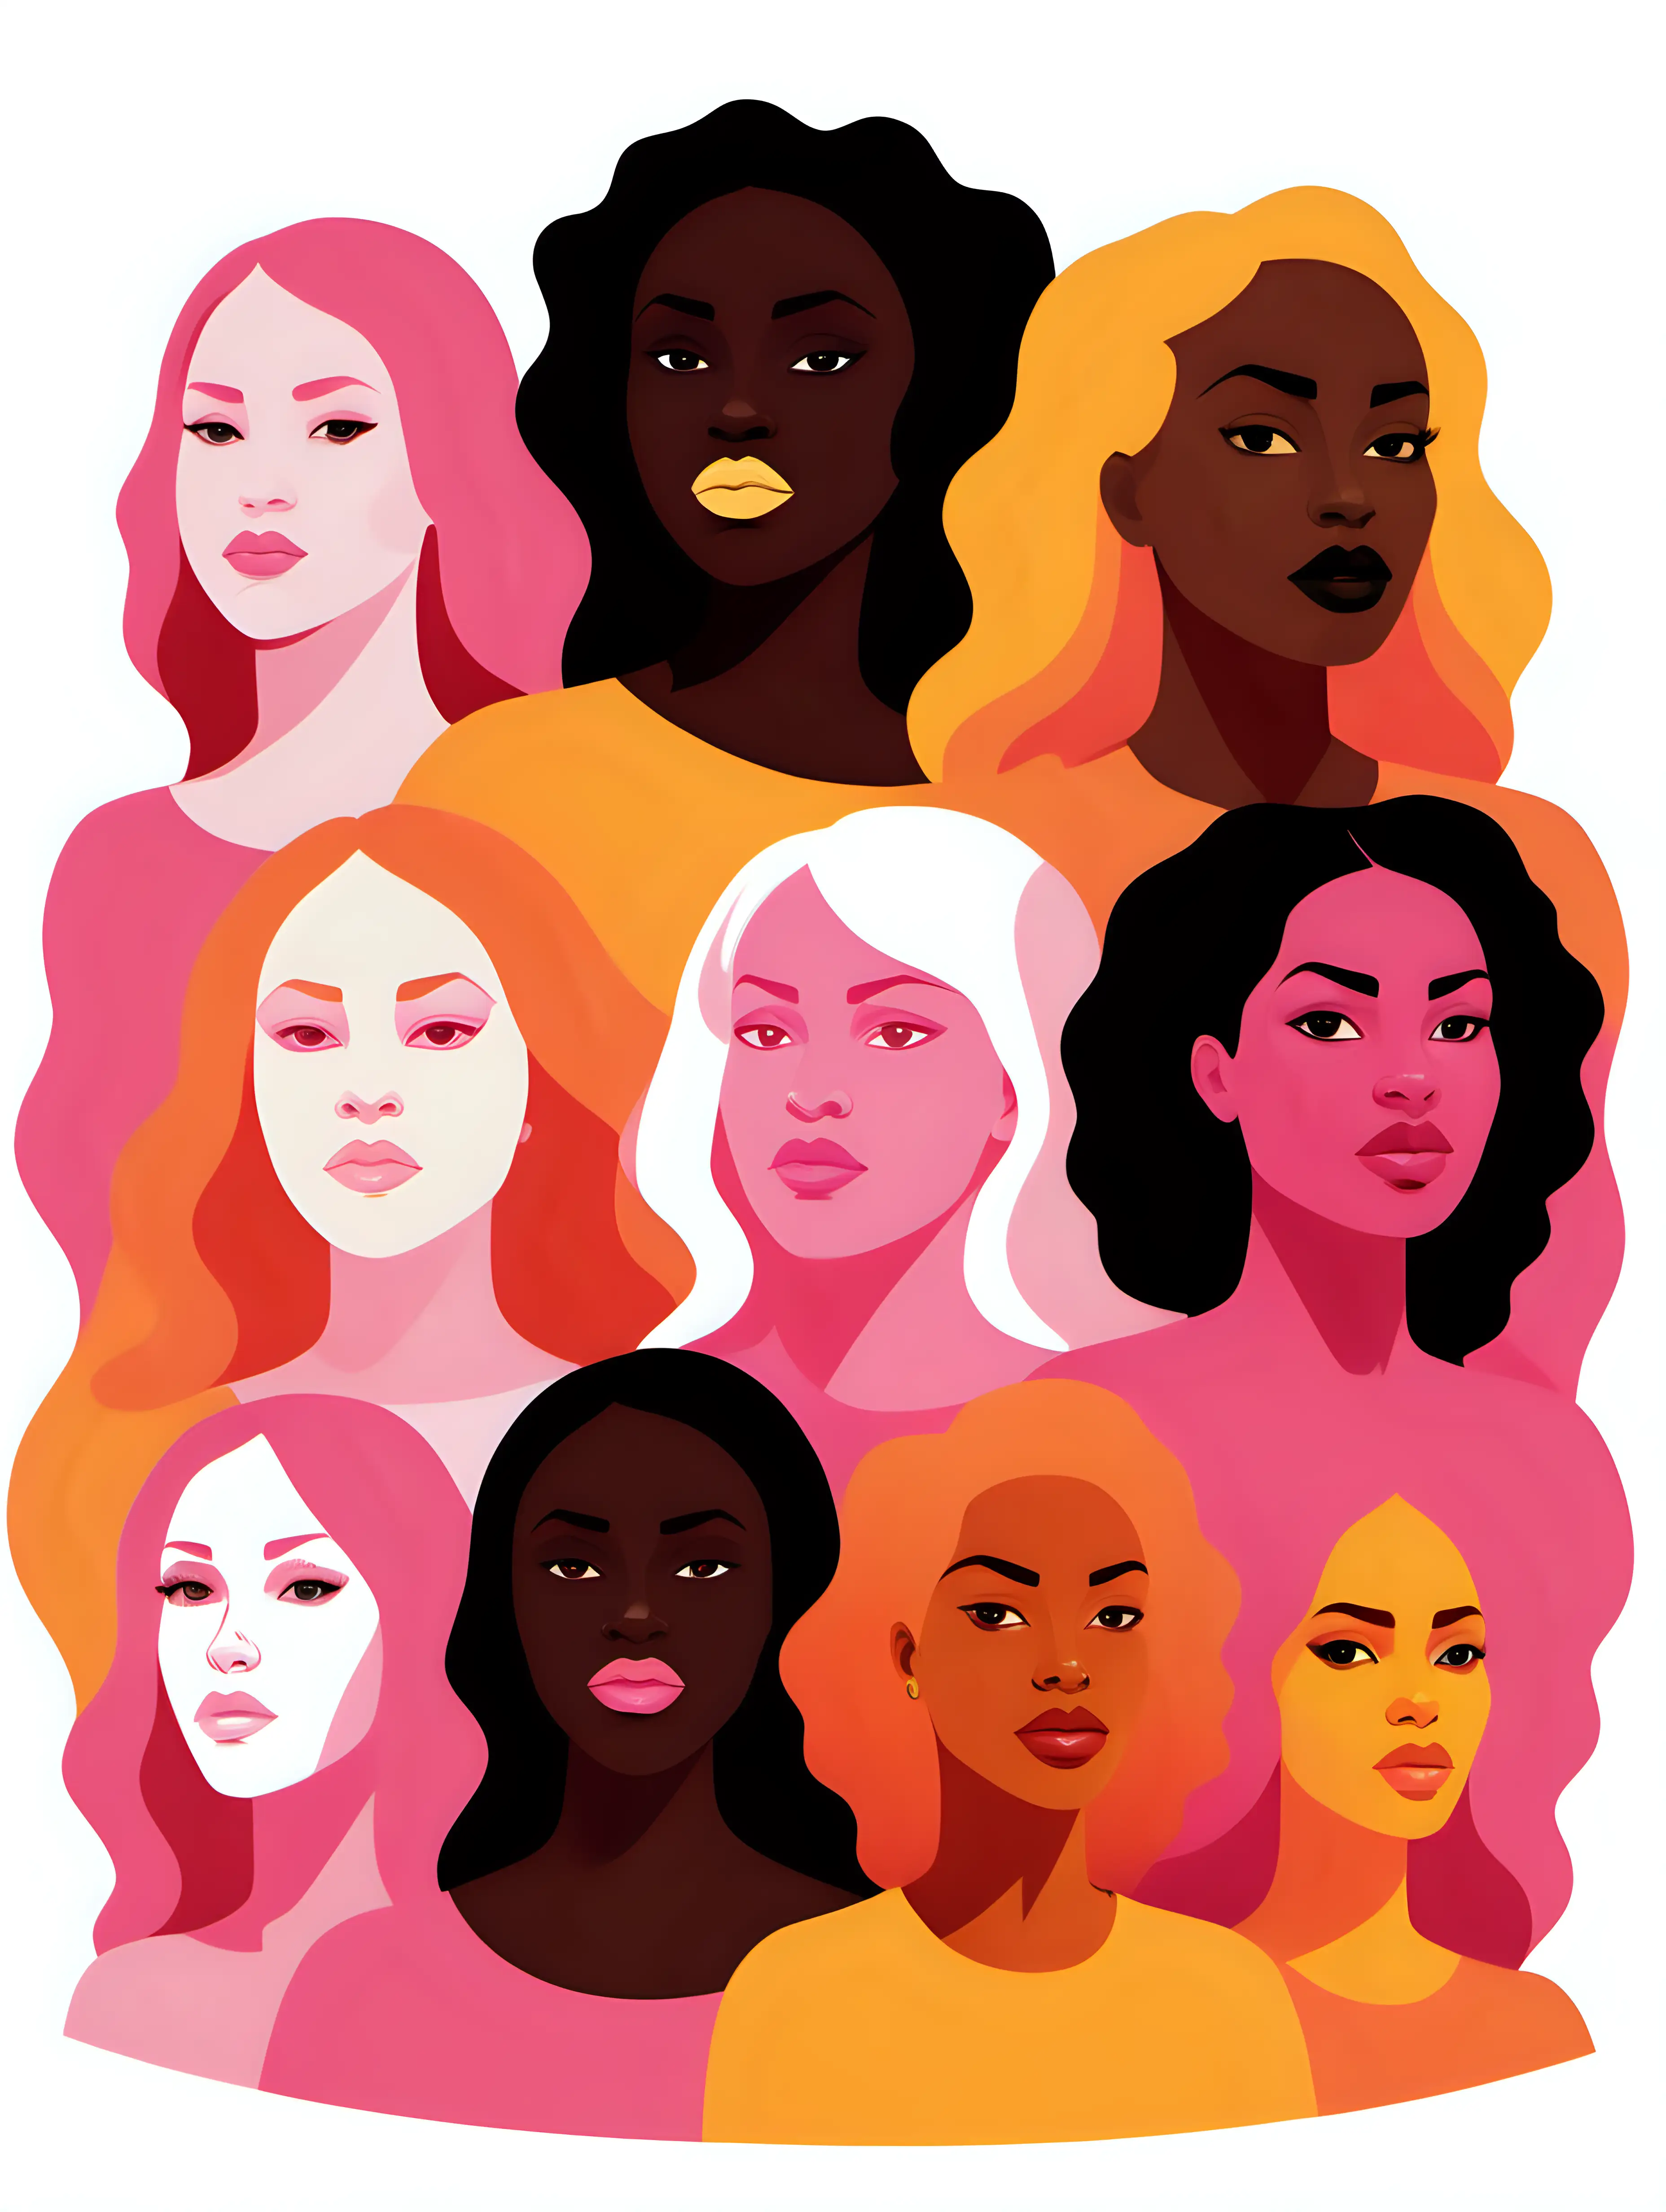 Empowering Feminist Voices Diverse Strength in Vibrant Artwork